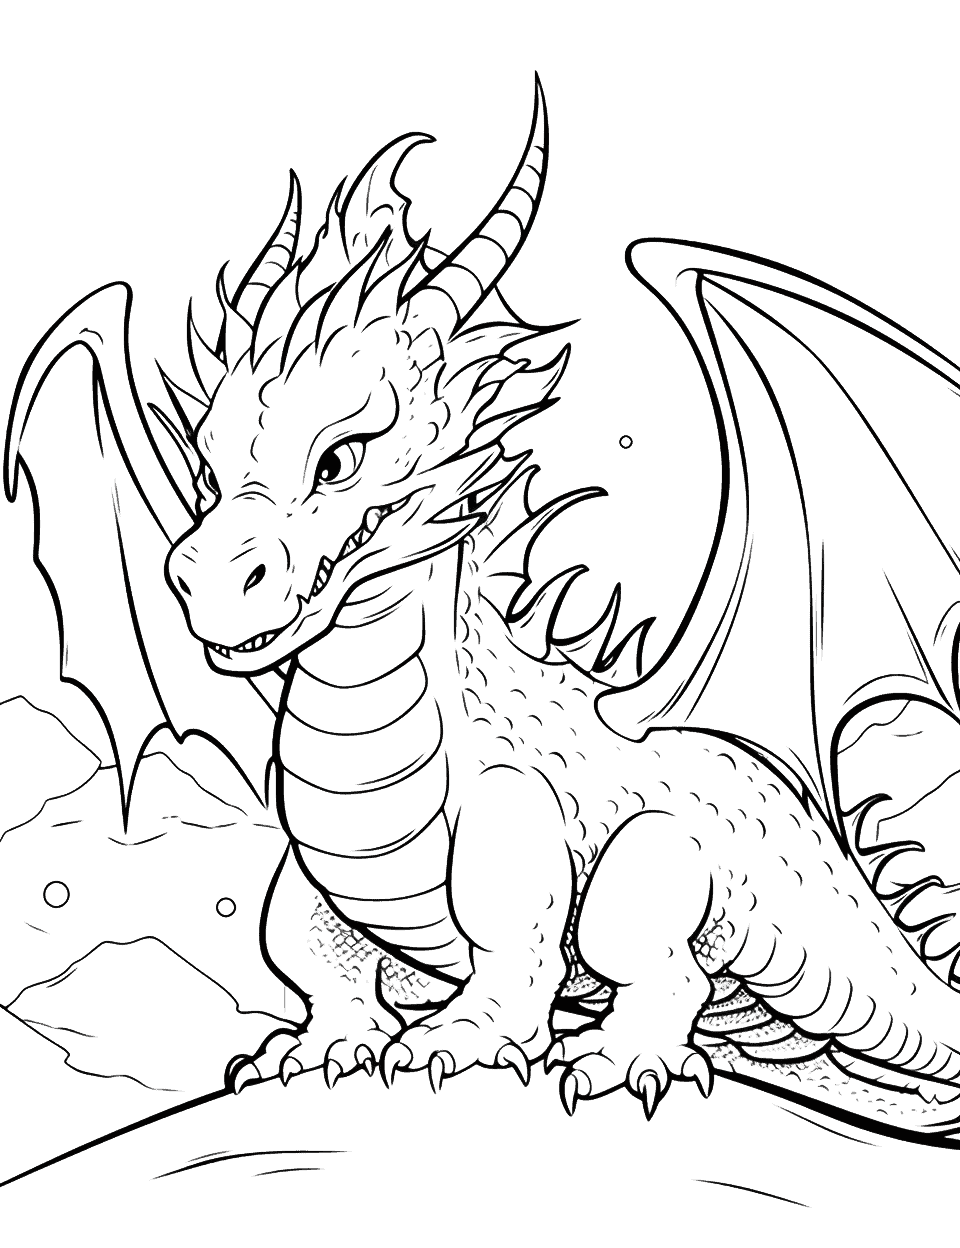 Ice Dragon in the Snow Coloring Page - An ice dragon, camouflaged in a snow-covered landscape.